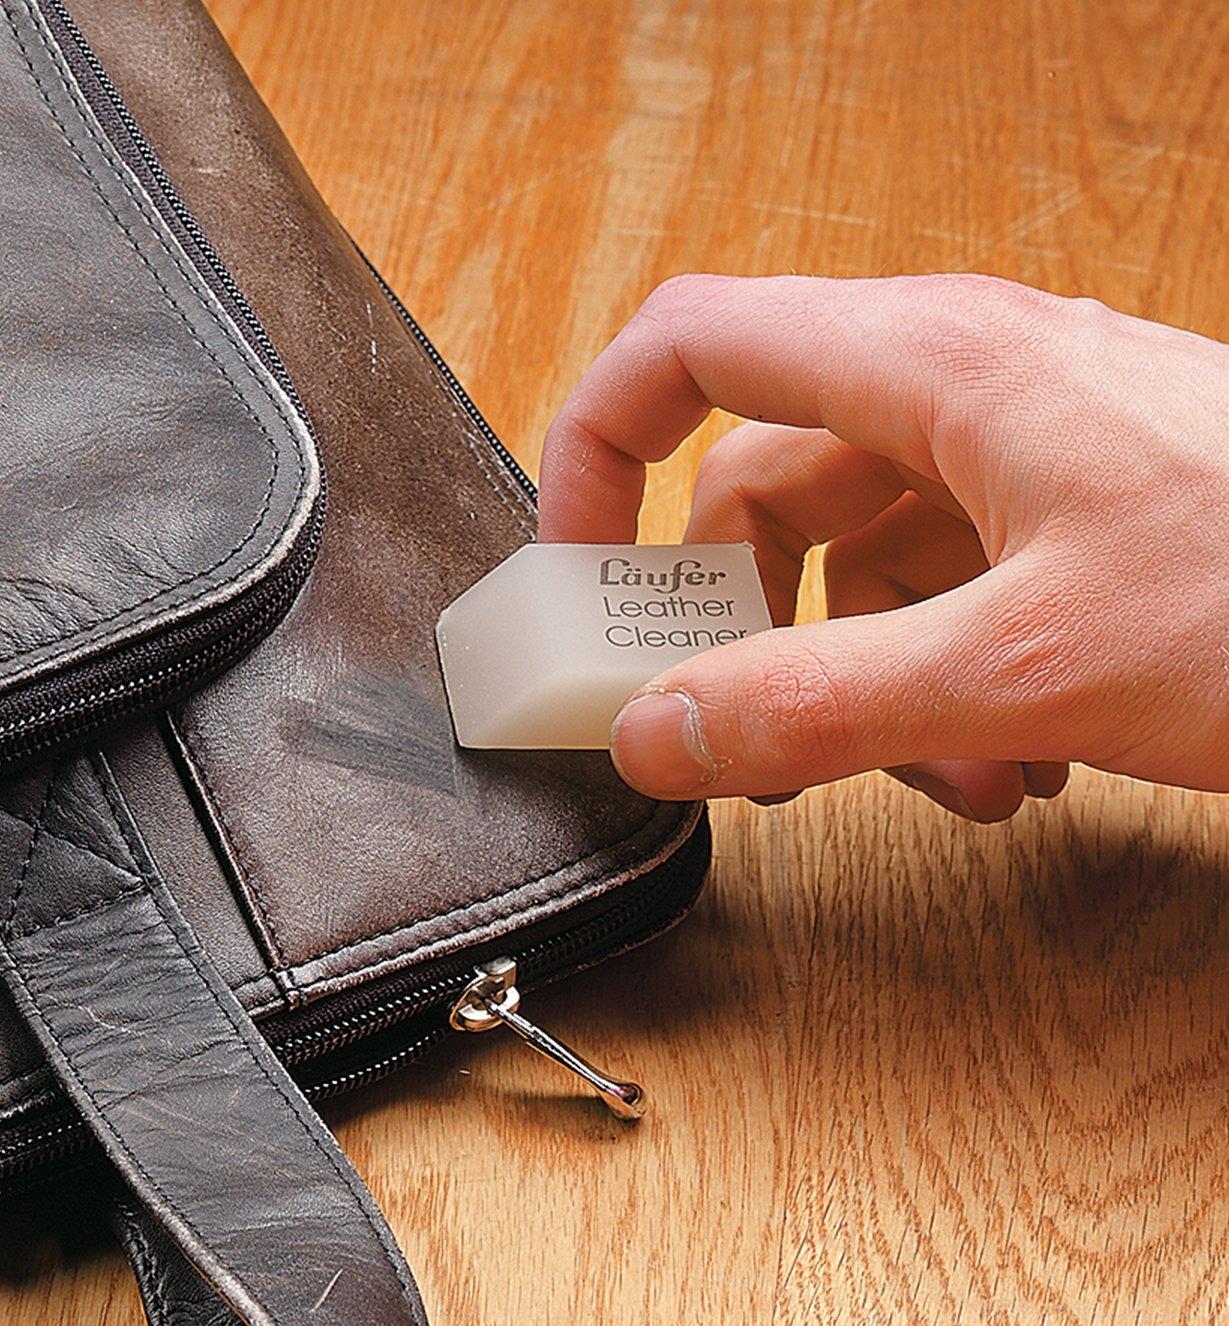 Using the leather eraser to clean a briefcase